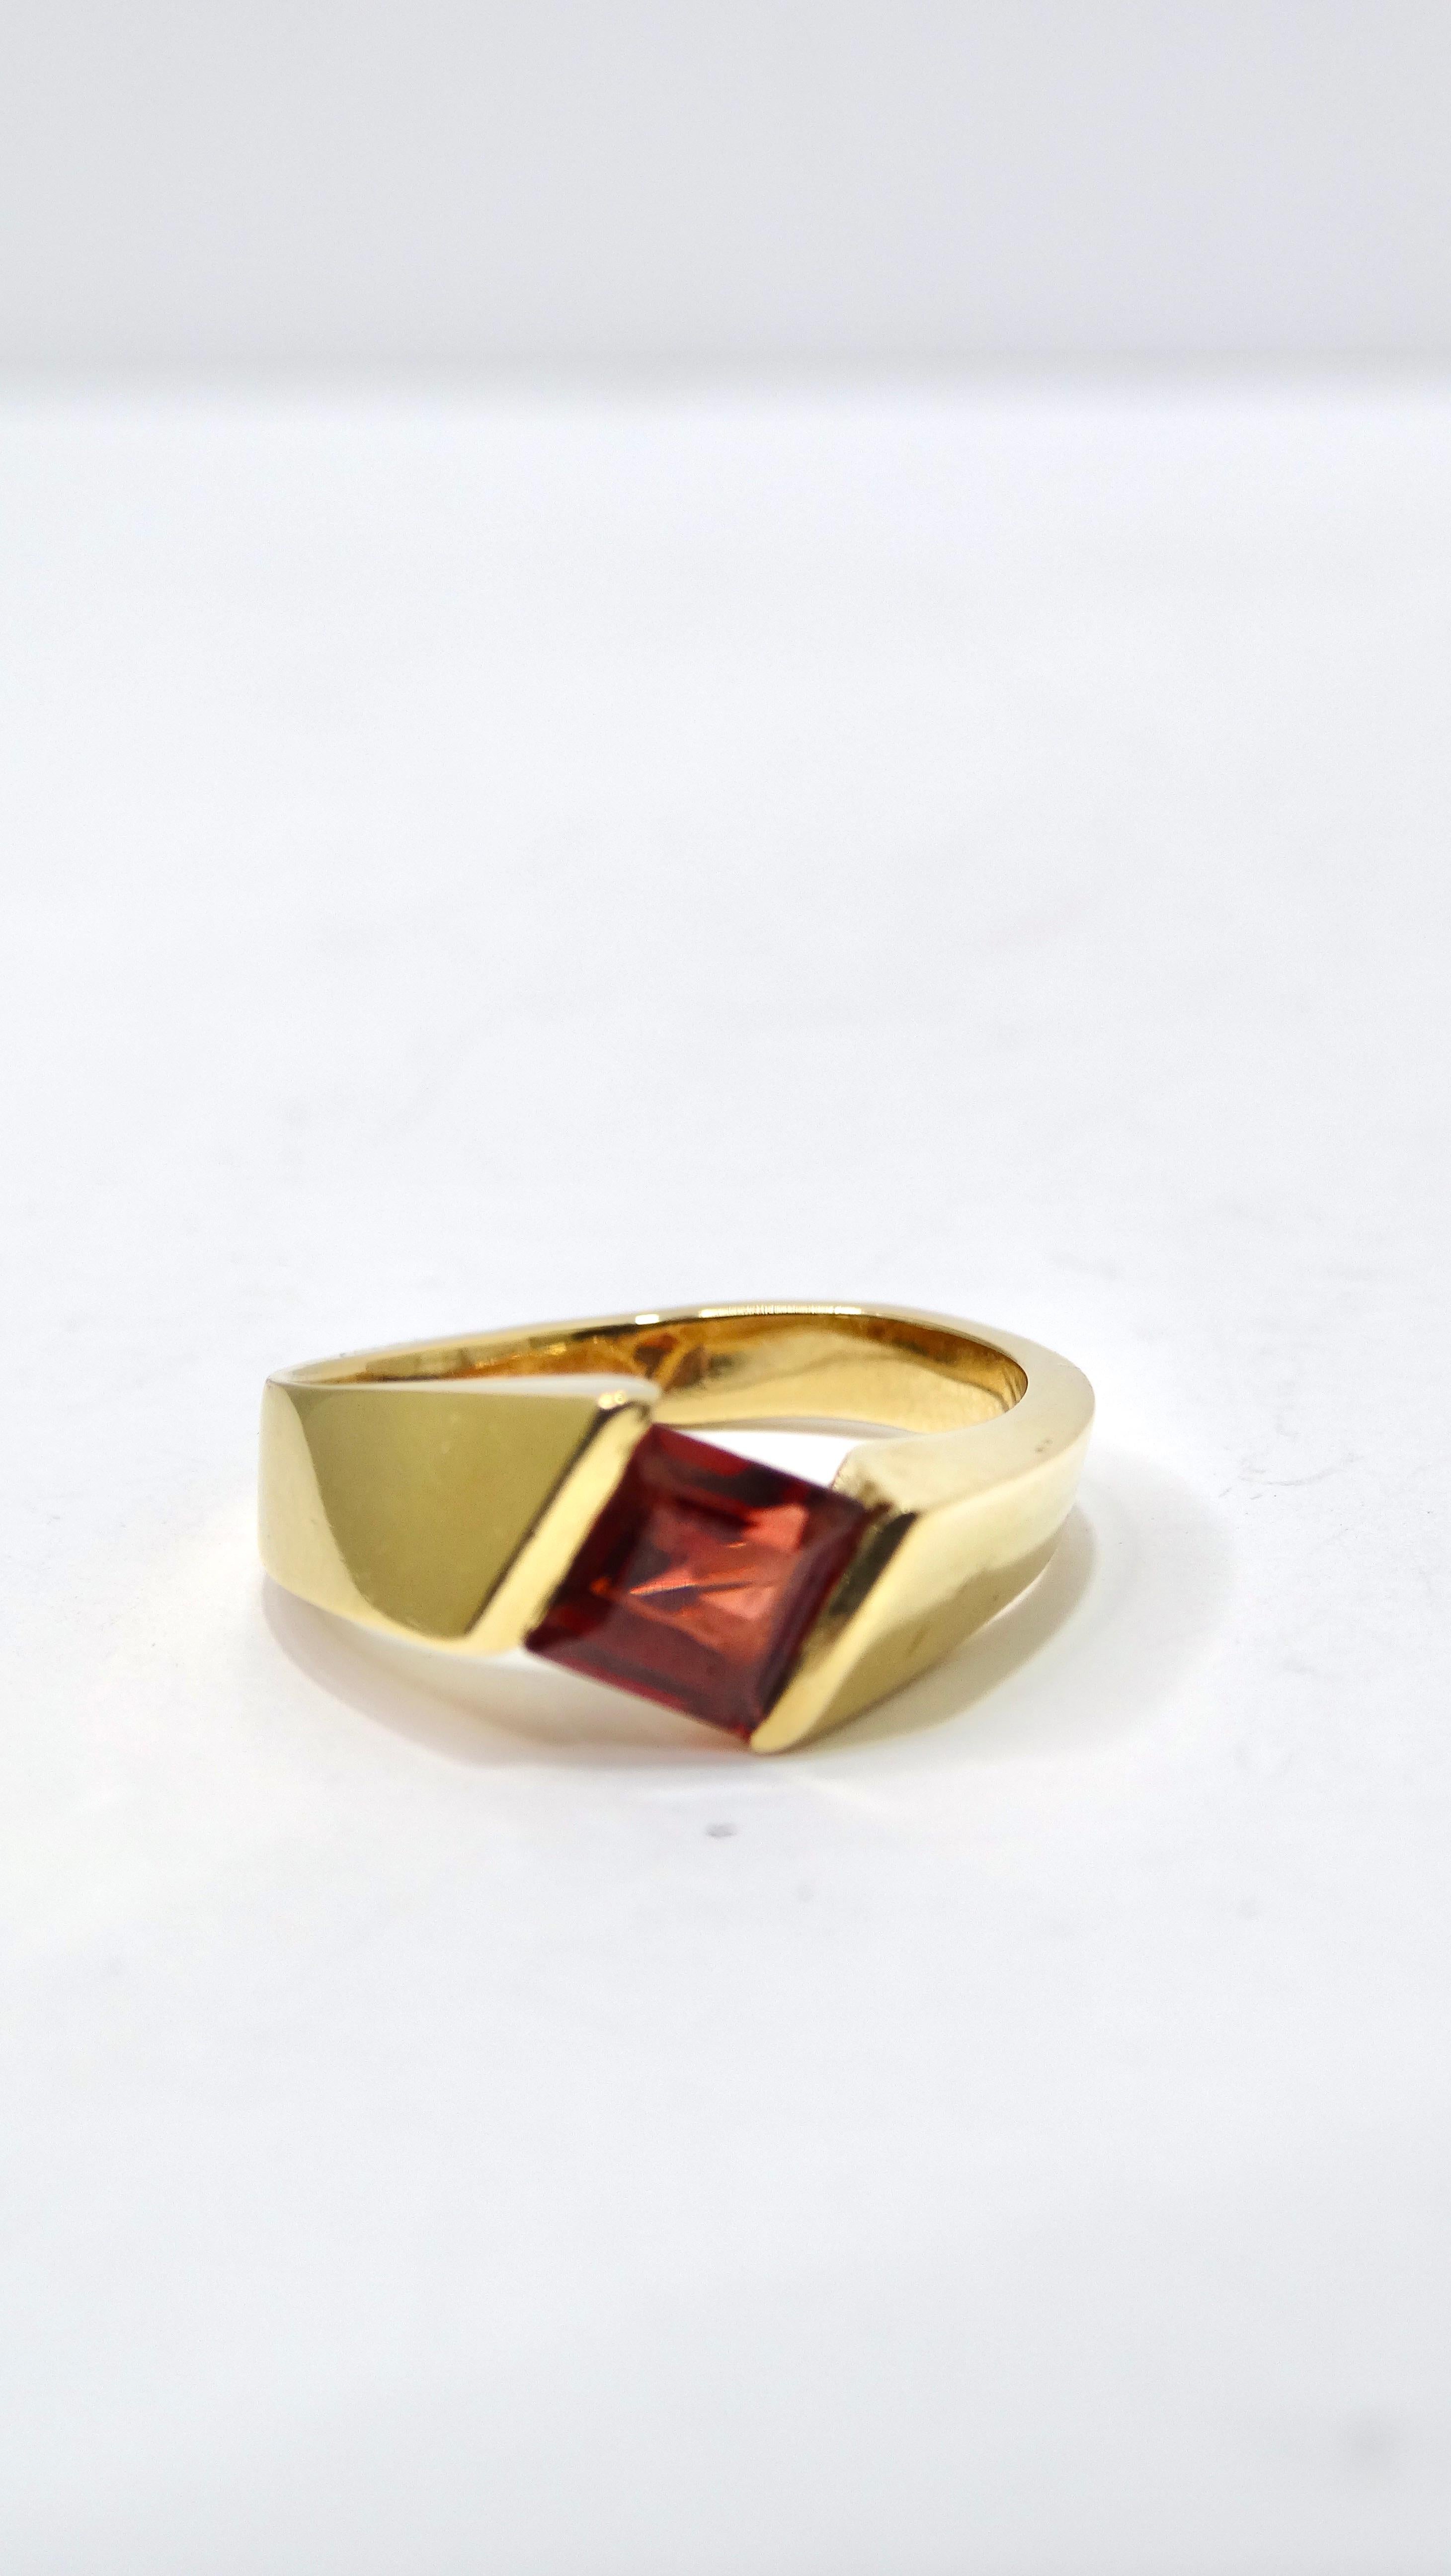 This impeccably designed ring can be yours today! Don't miss your chance to get your hands on this beautiful Garnet stone in a square cut. Garnet is the birthstone of January and signifies friendship, protection, trust, commitment, and love. It is